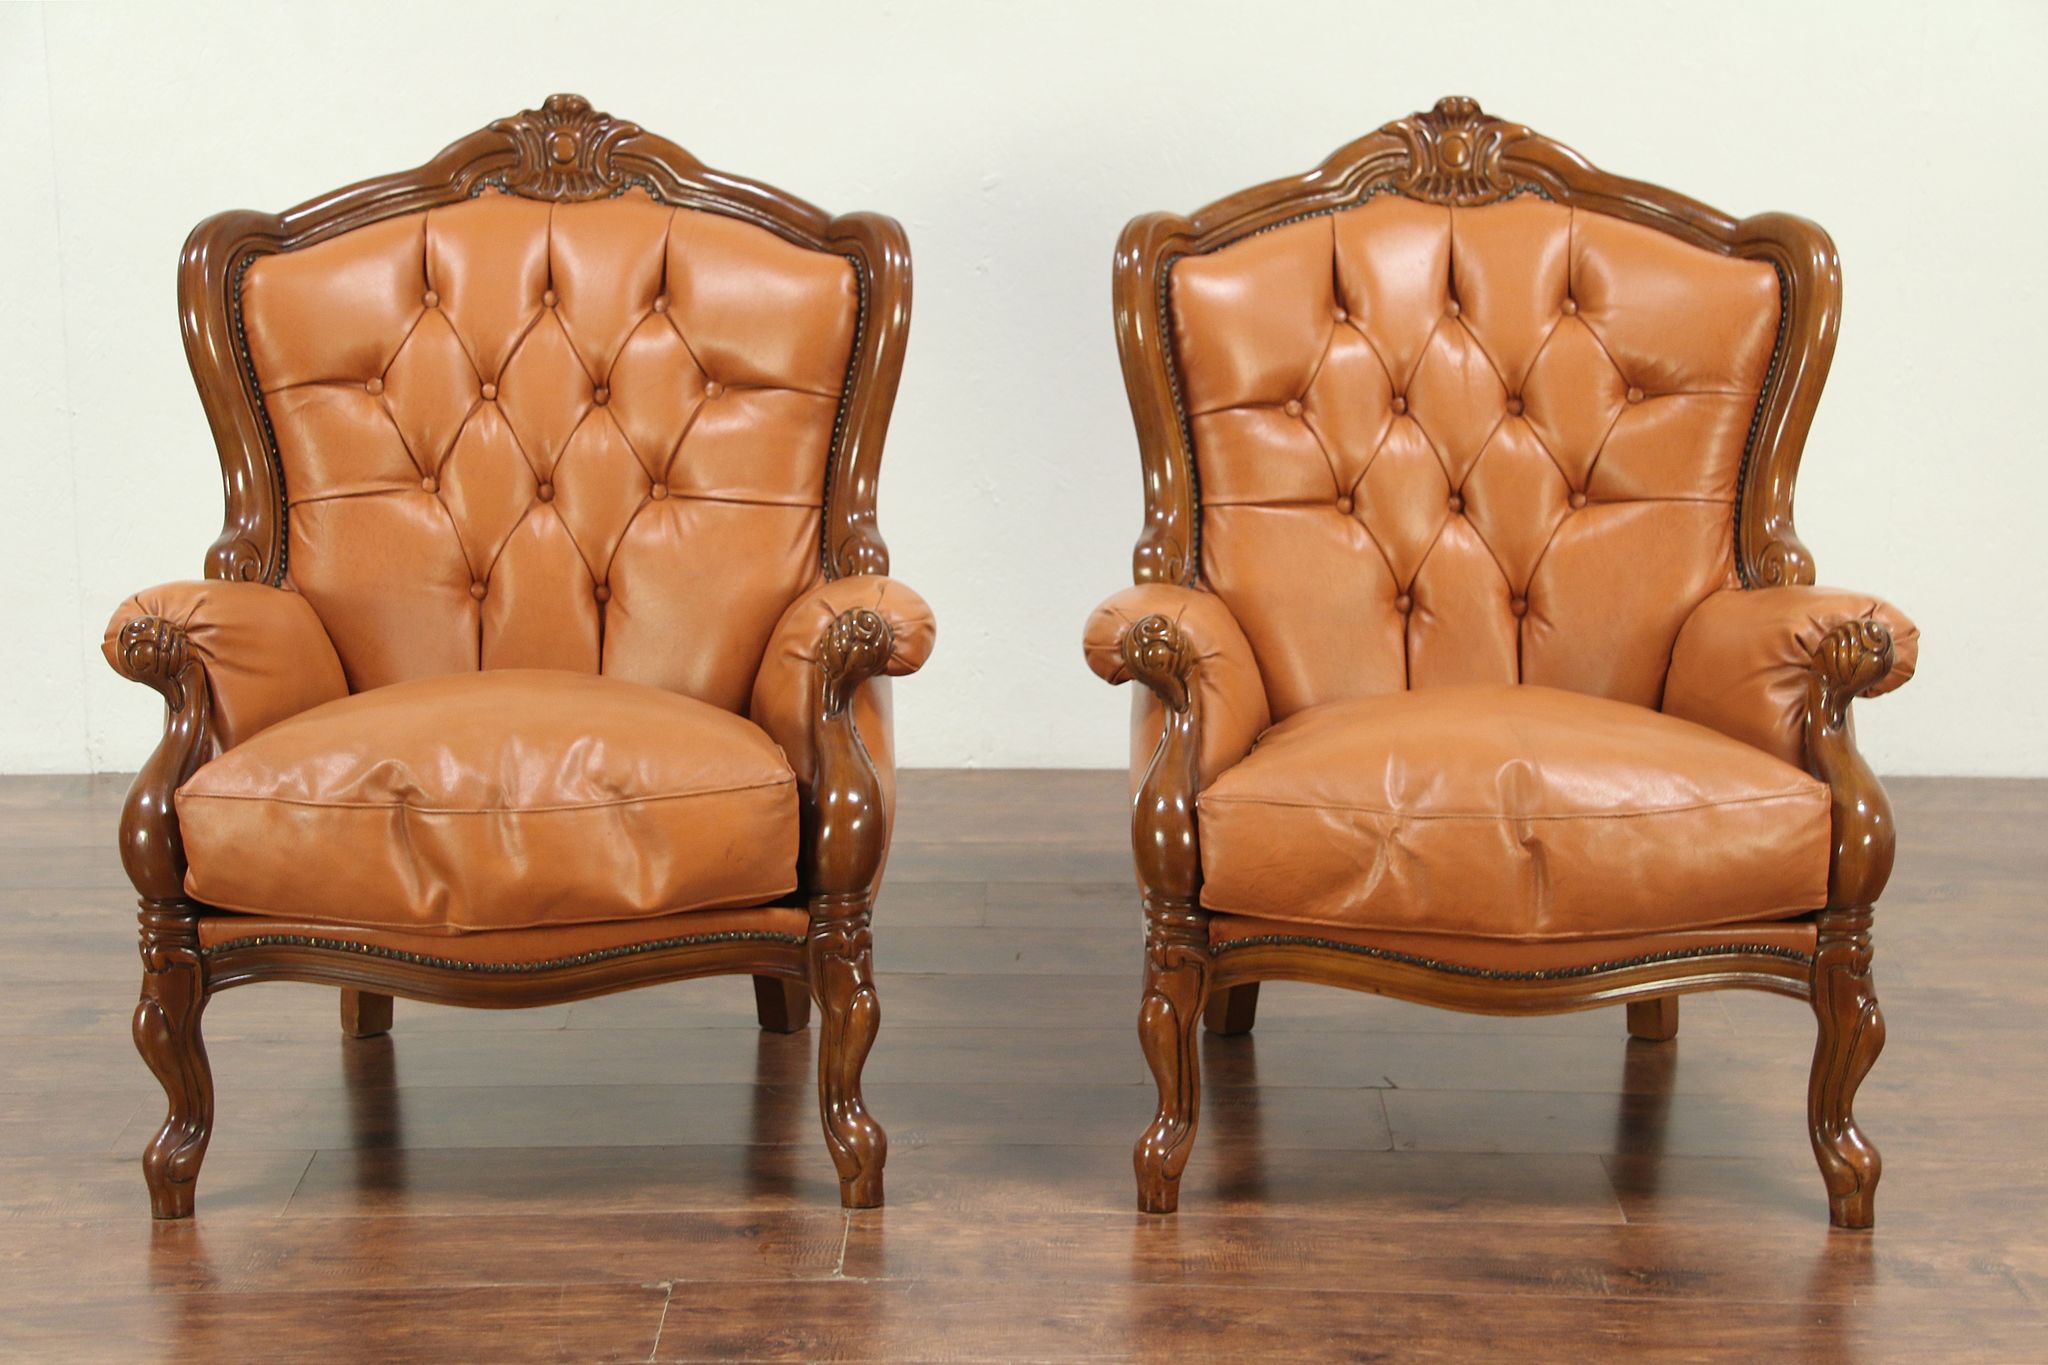 SOLD Pair of Carved Fruitwood Vintage Wing Back Chairs